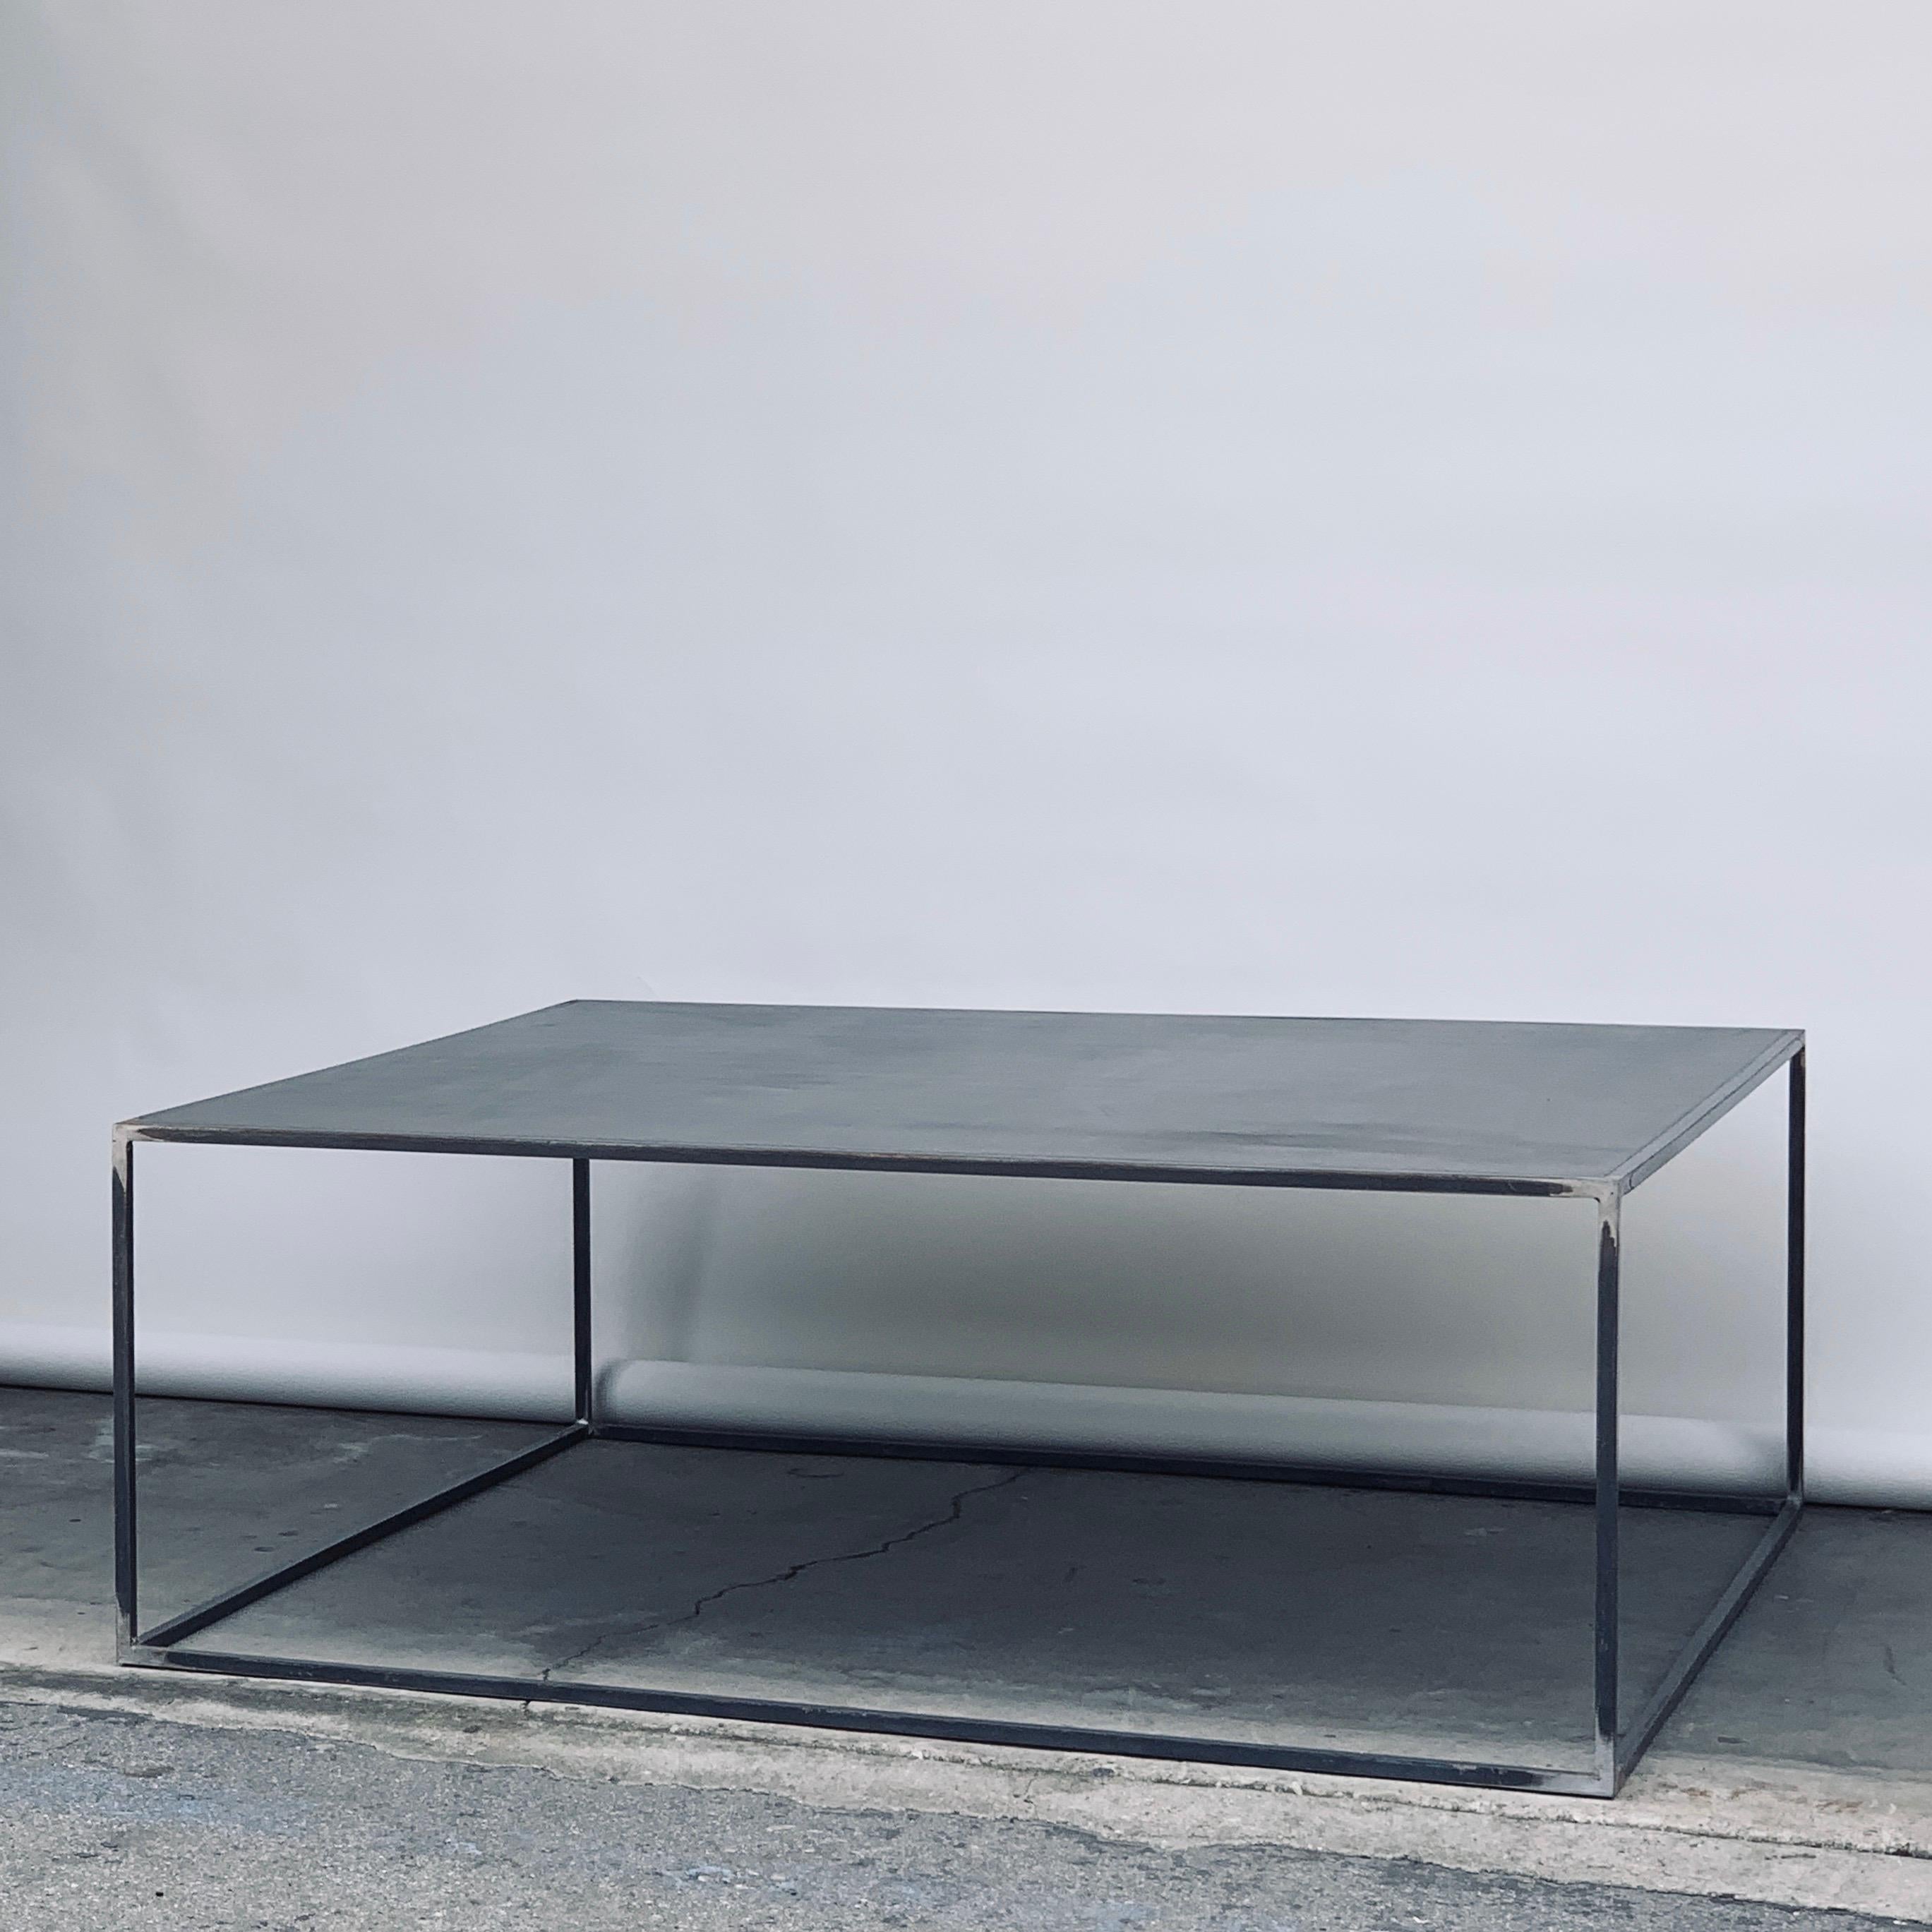 Minimalist 'Filiforme' Patinated Steel Coffee Table by Design Frères In New Condition For Sale In Los Angeles, CA